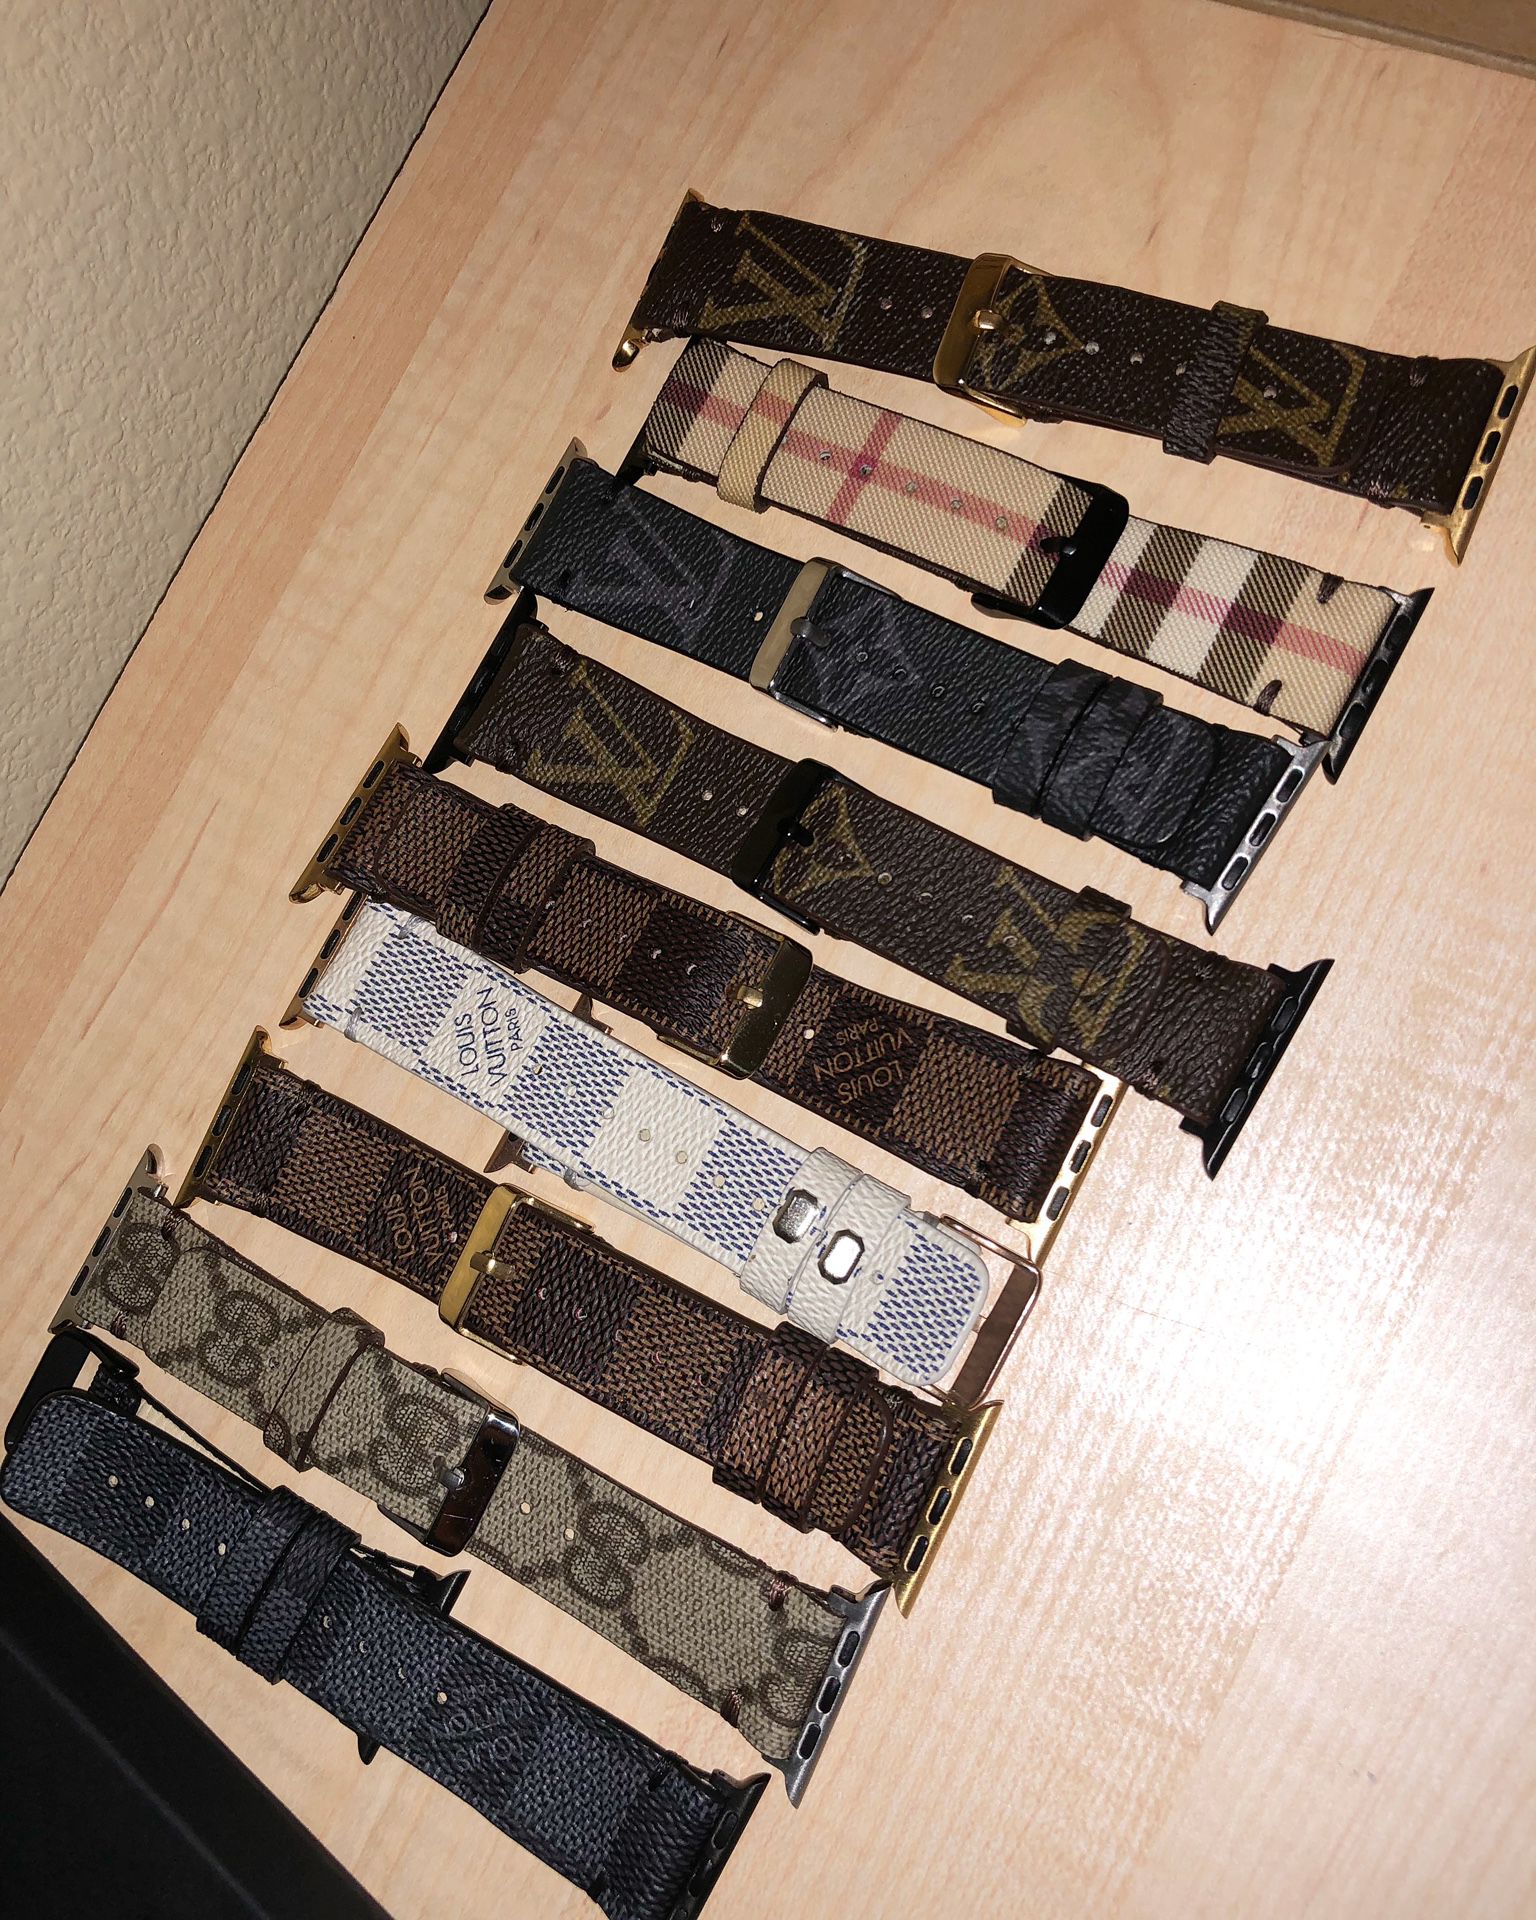 LOUIS VUITTON, GUCCI, BURBERRY, and MCM AUTHENTIC CUSTOM APPLE WATCH BANDS  for Sale in Corona, CA - OfferUp